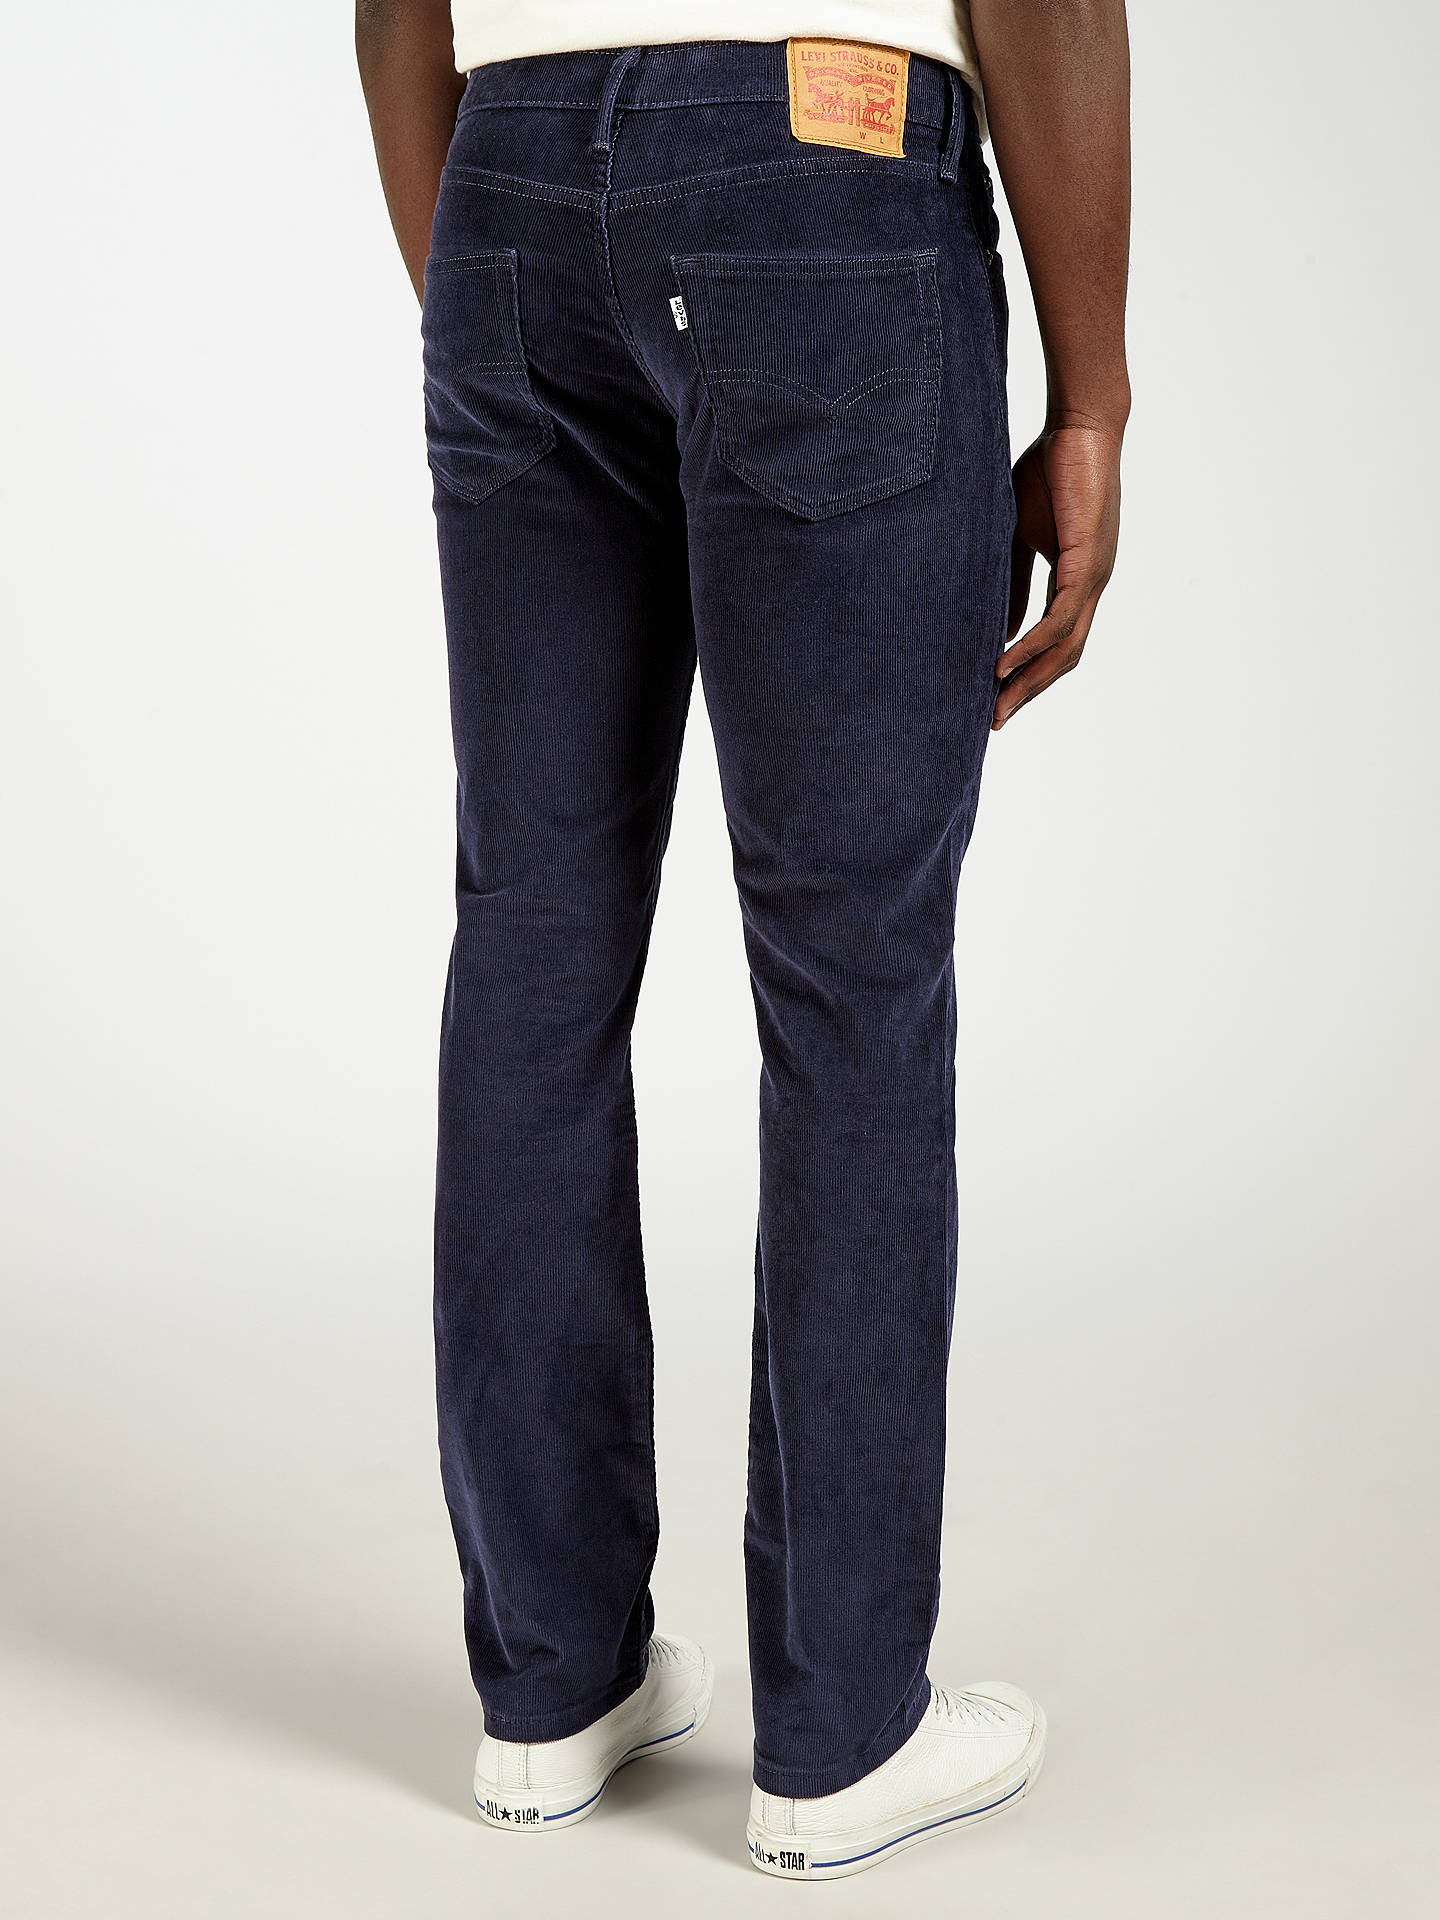 Levi's 511 Slim Fit Corduroy Trousers, Nightwatch Blue at John Lewis ...